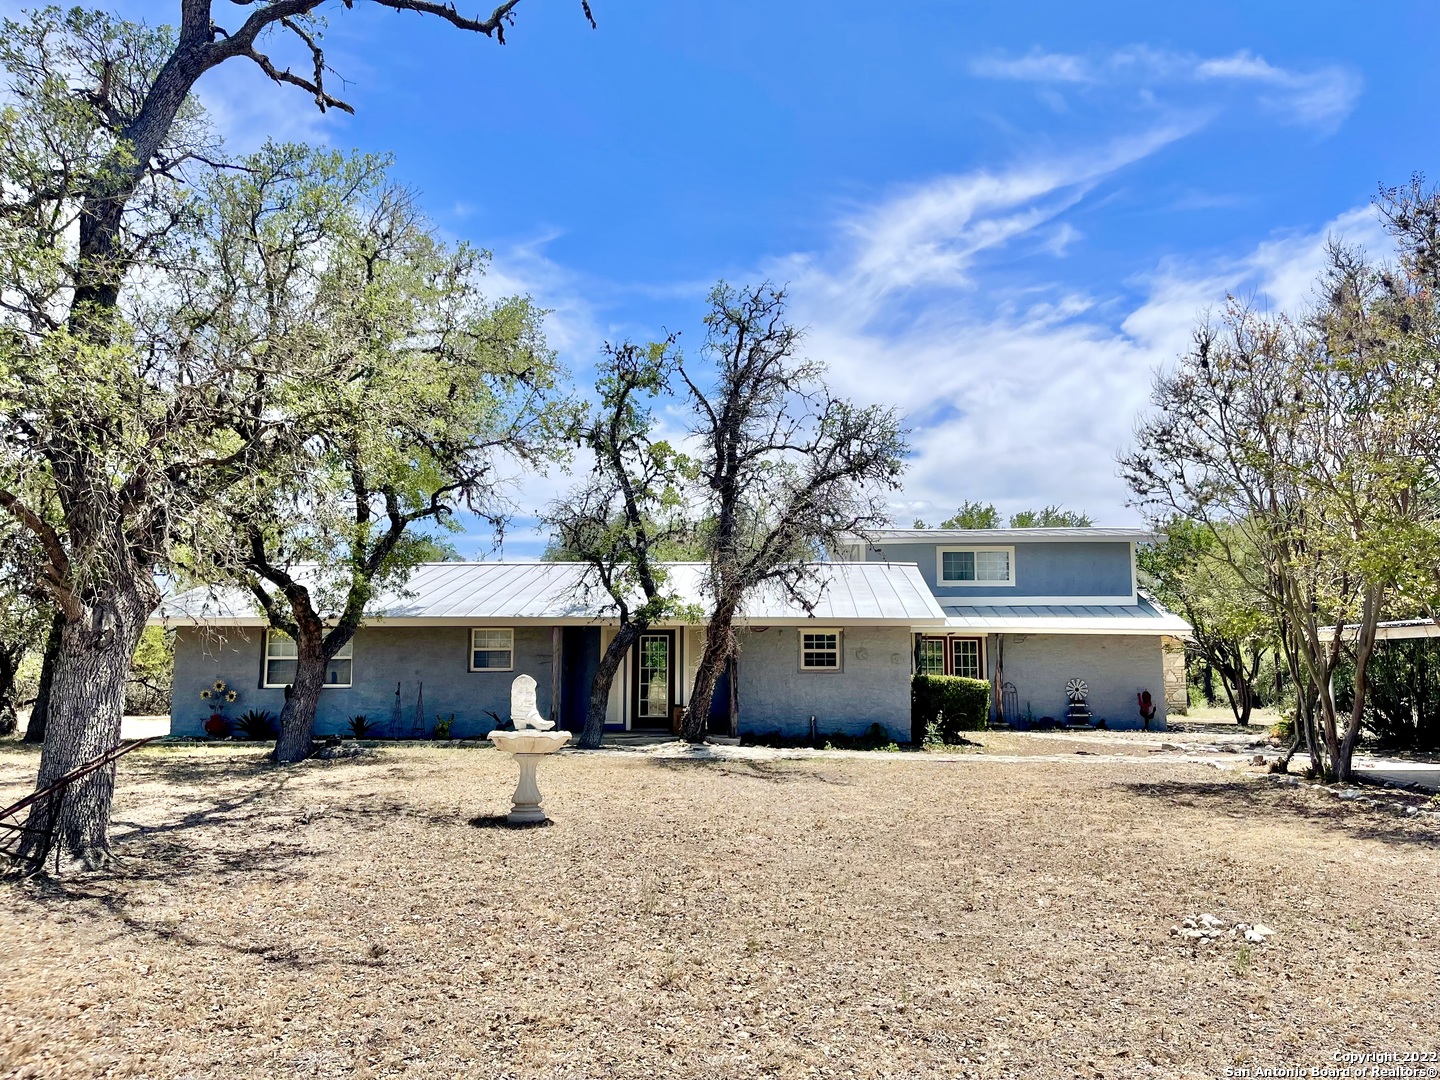 Looking to settle down in a small community? This TX Hill country 8.25+/- Ac property located in Medina, TX on the West Prong of the Medina River might be the one! The main house is a 2126+/- sq ft 1-1/2 story home that has 3 bdrm-3-1/2 baths. There is also a detached efficiency guest house, barn, and sheds. This would be a great property for livestock (recently home to several Champion Show Goats). The barns would support working on several different types of hobbies with a few modifications. With approximately 340'+/- of river frontage, there's a lot to do and even more fun to be had!